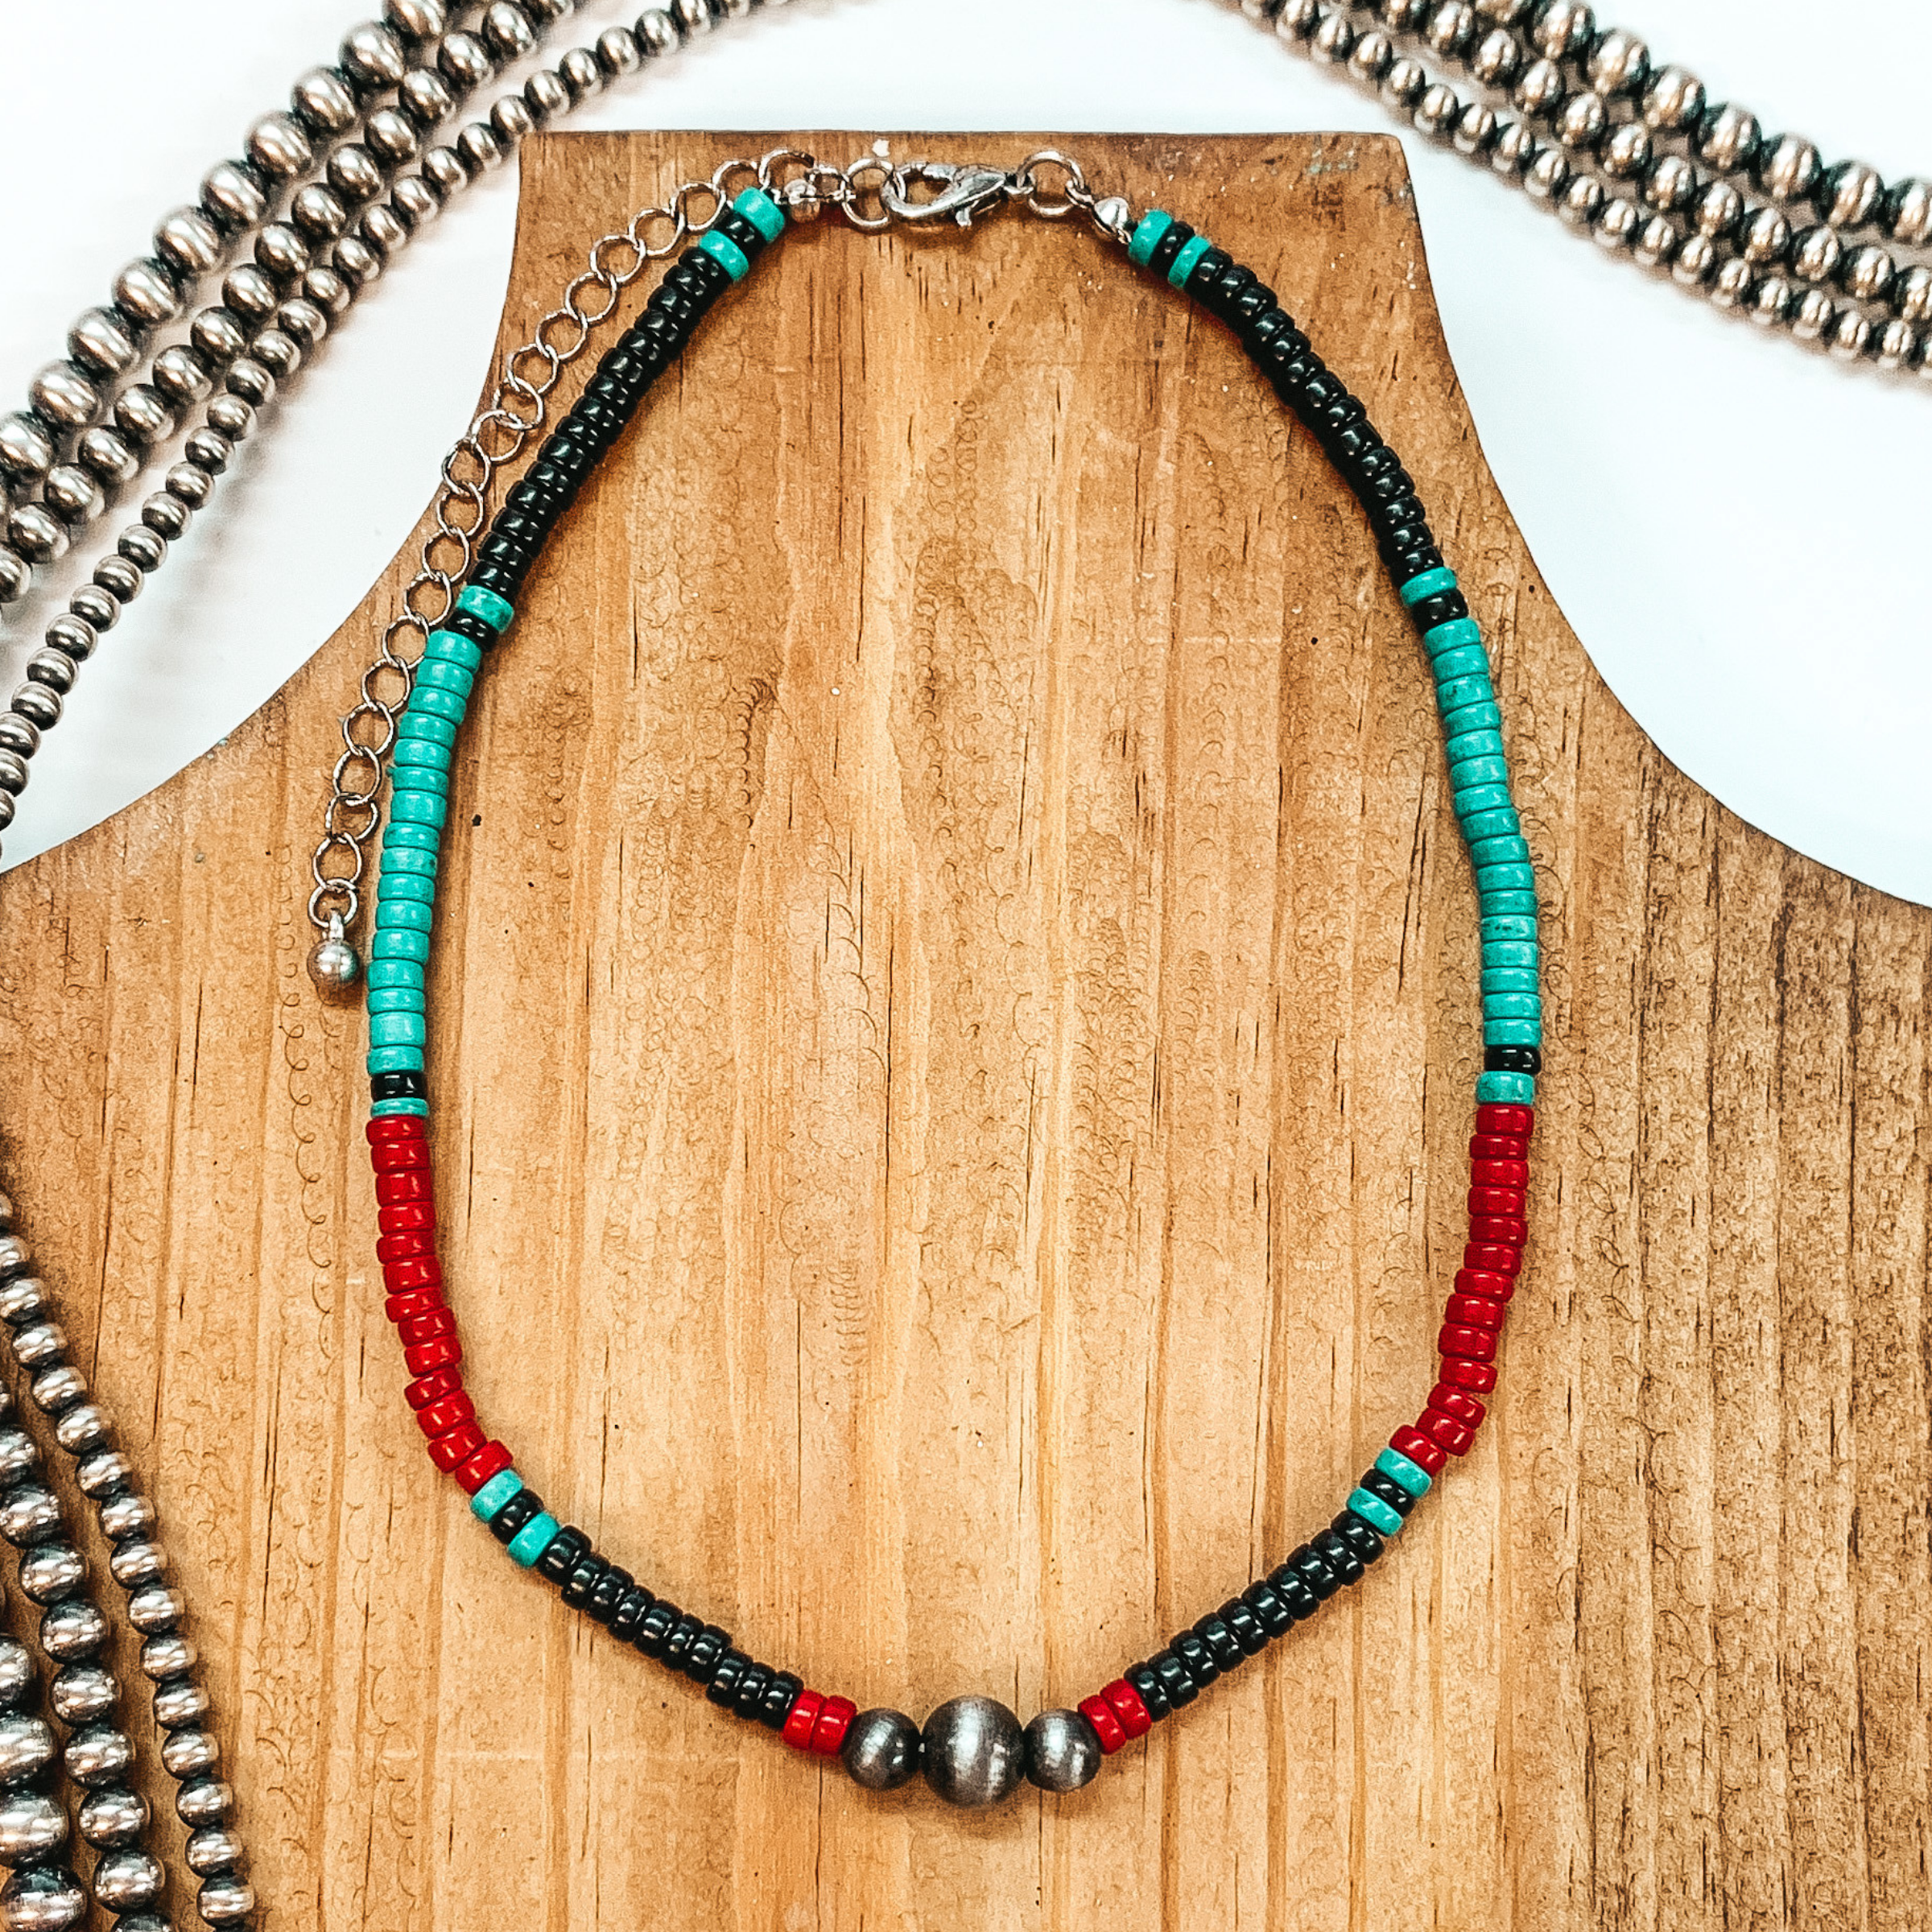 This necklace has segments of beads in the colors black, red, and turquoise with black beaded spacers. This necklace also includes three silver beads at the center. this necklace is pictured on a brown necklace holder on a white background with silver beads.